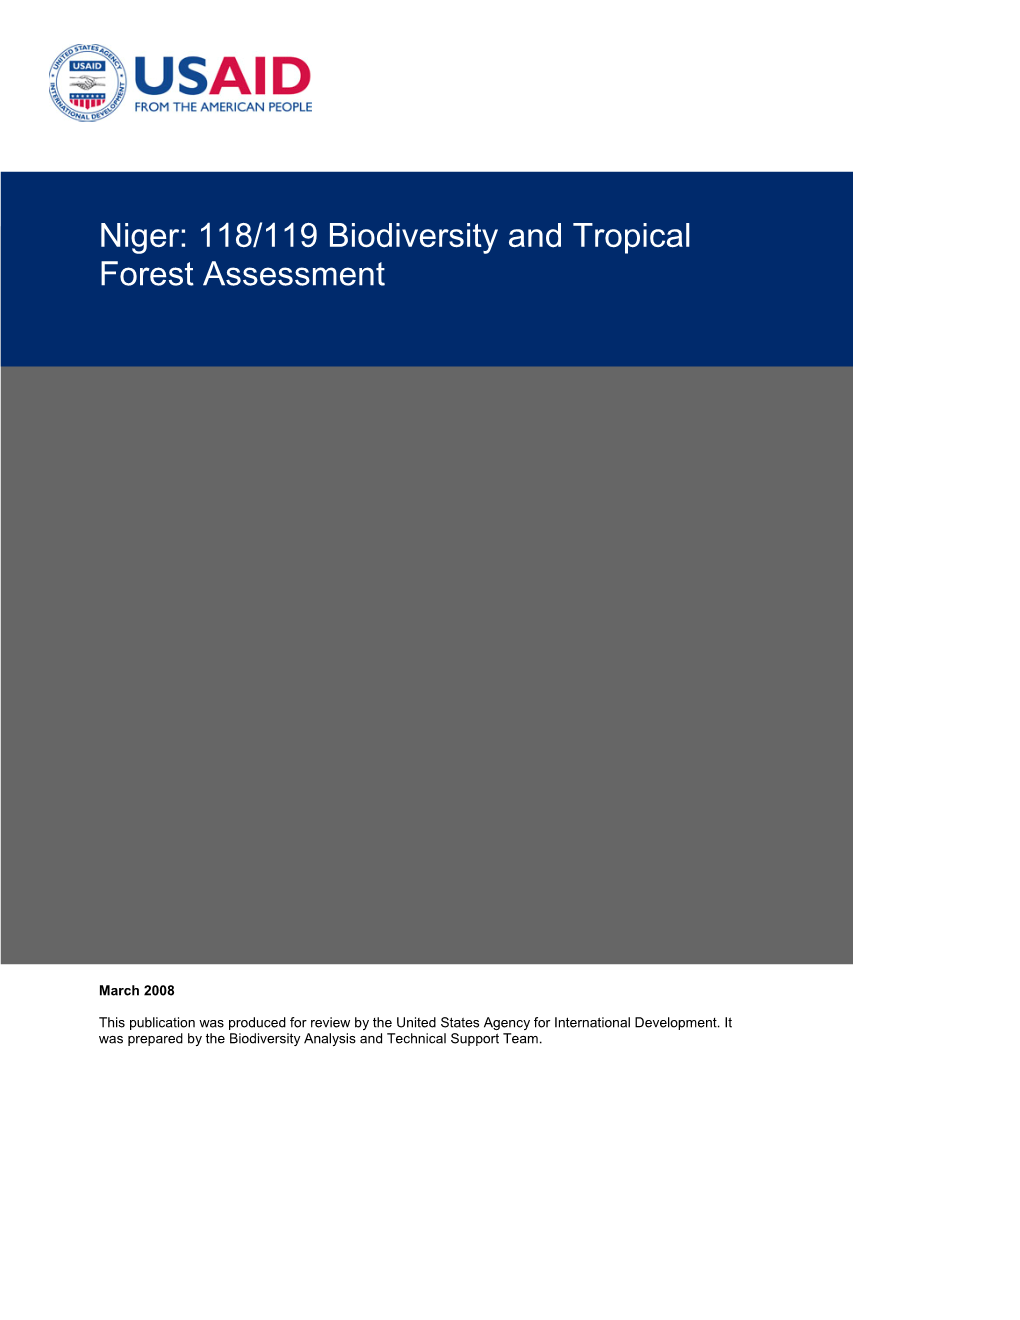 Niger: 118/119 Biodiversity and Tropical Forest Assessment